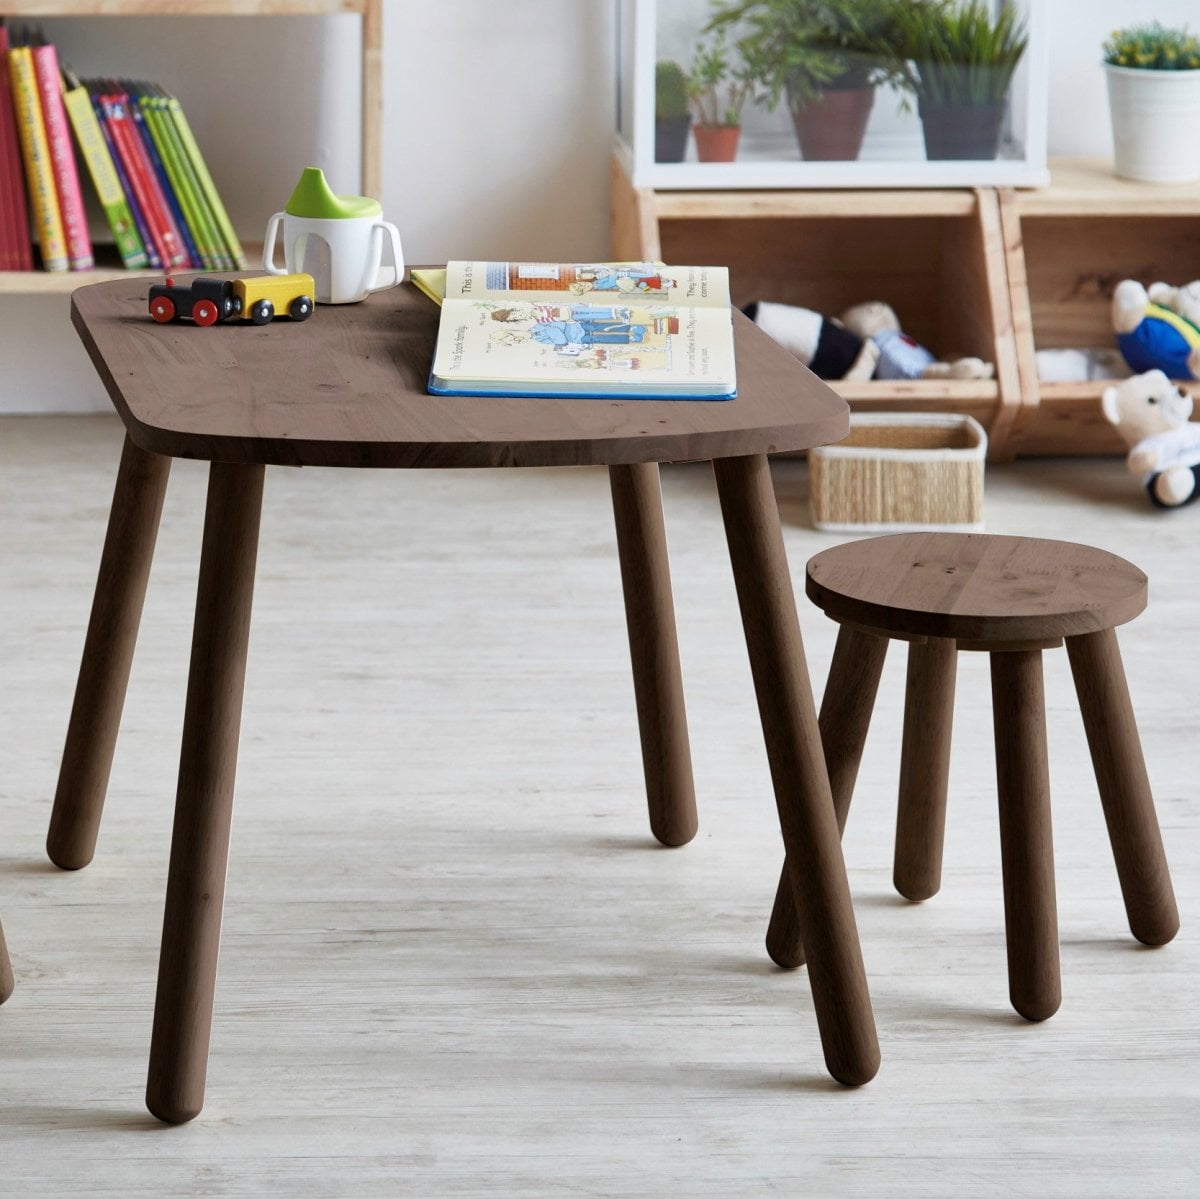 Smart Solid Wood 1 Dining/Study/Play Kids Table Col: Walnut (WIL-6514T) picket and rail